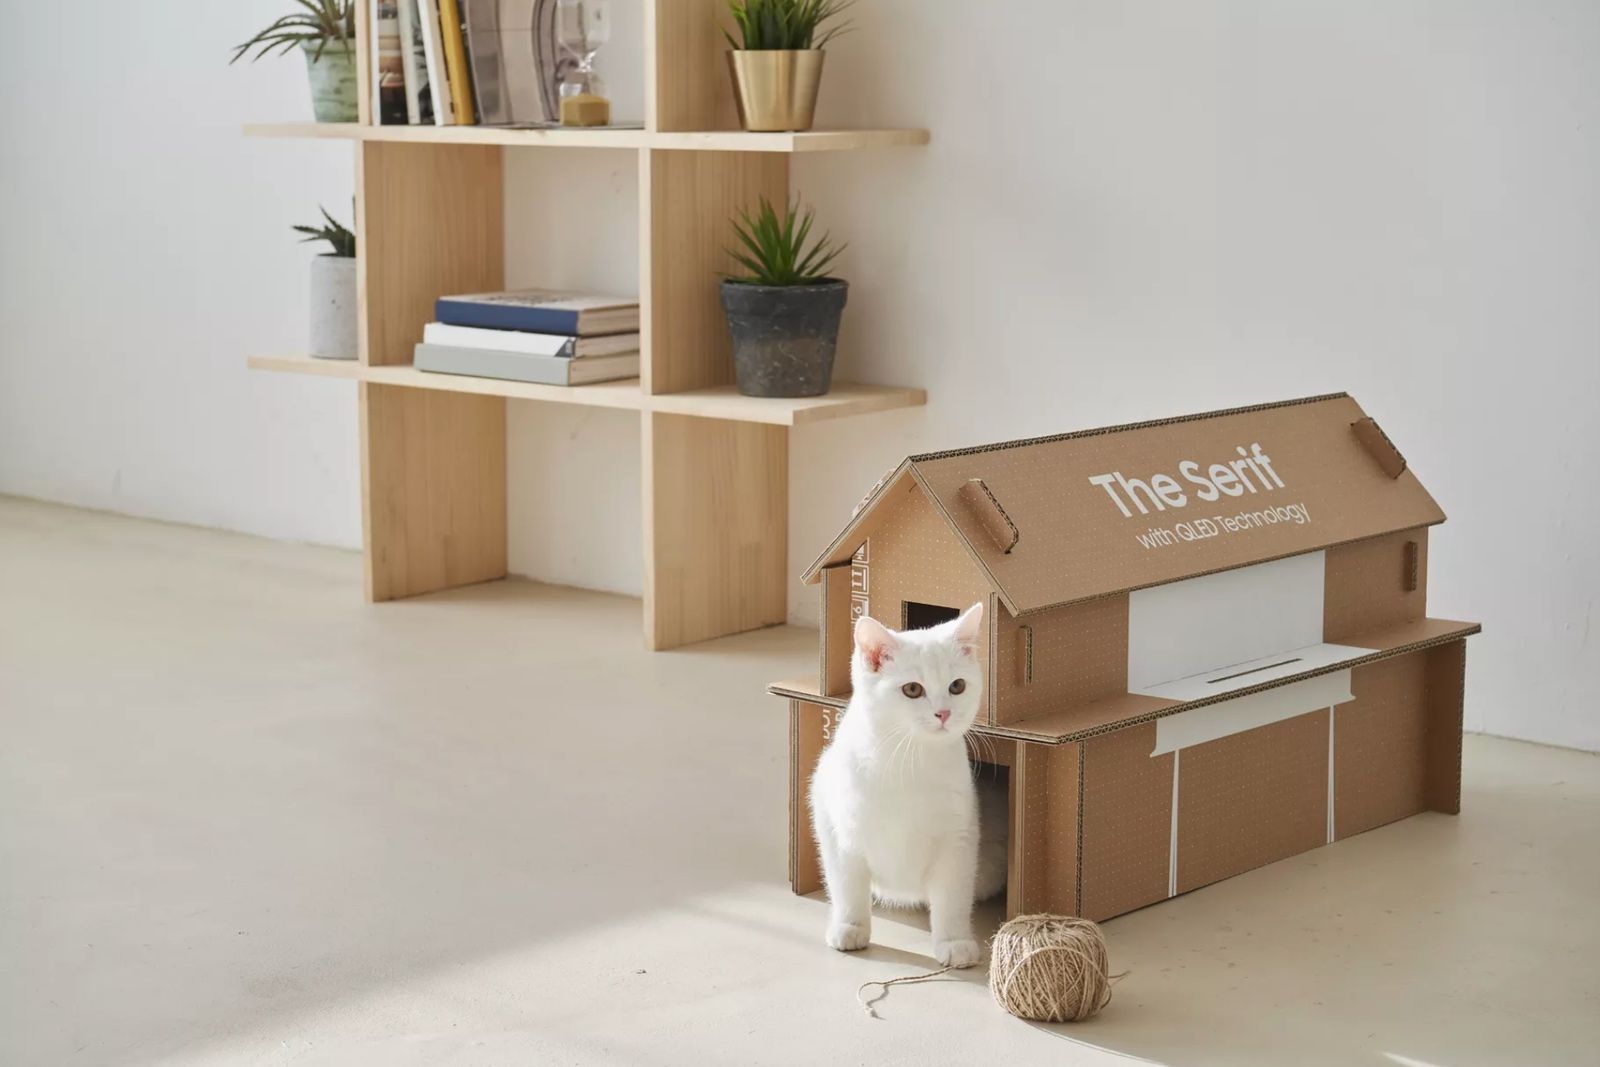 Some of Samsungs TV packaging can now be recycled into a cat house image 1